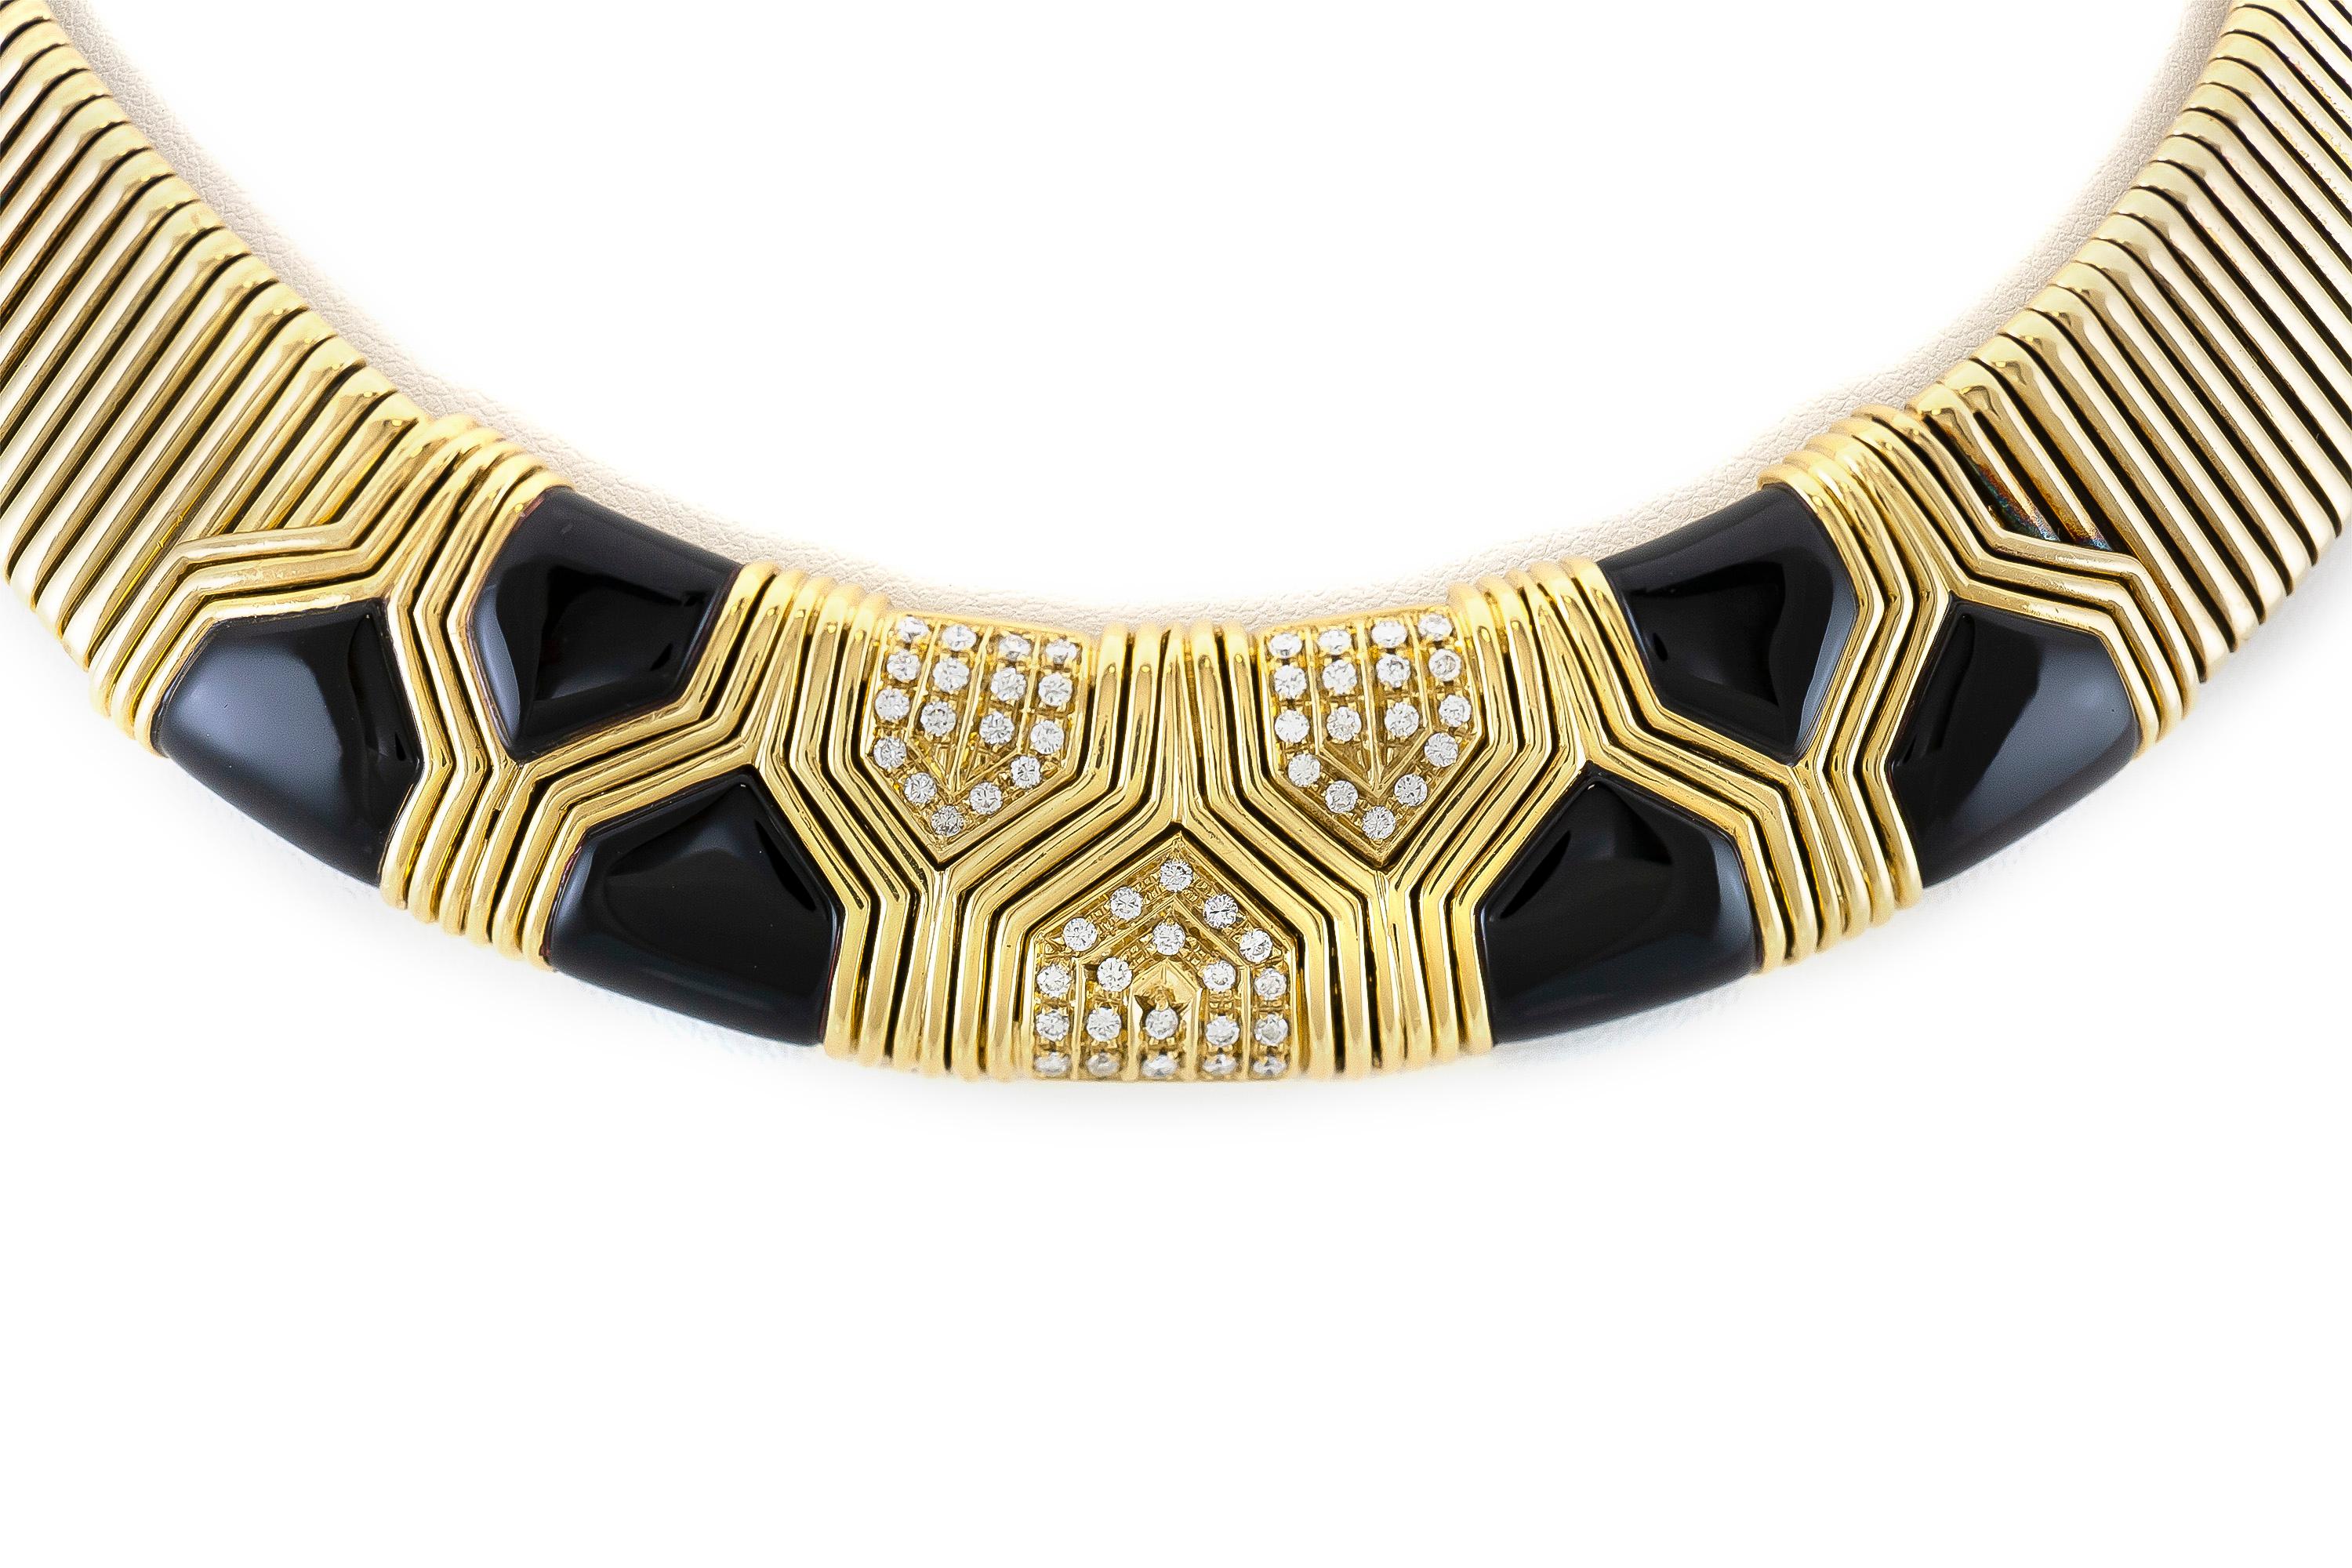 Set of a necklace and a bracelet finely crafted in 18 karat yellow gold; necklace 118.4 DWT and bracelet 64.5 DWT and black onyx. Both items with diamonds weighing of 1.80 karat. 
Circa 1980.